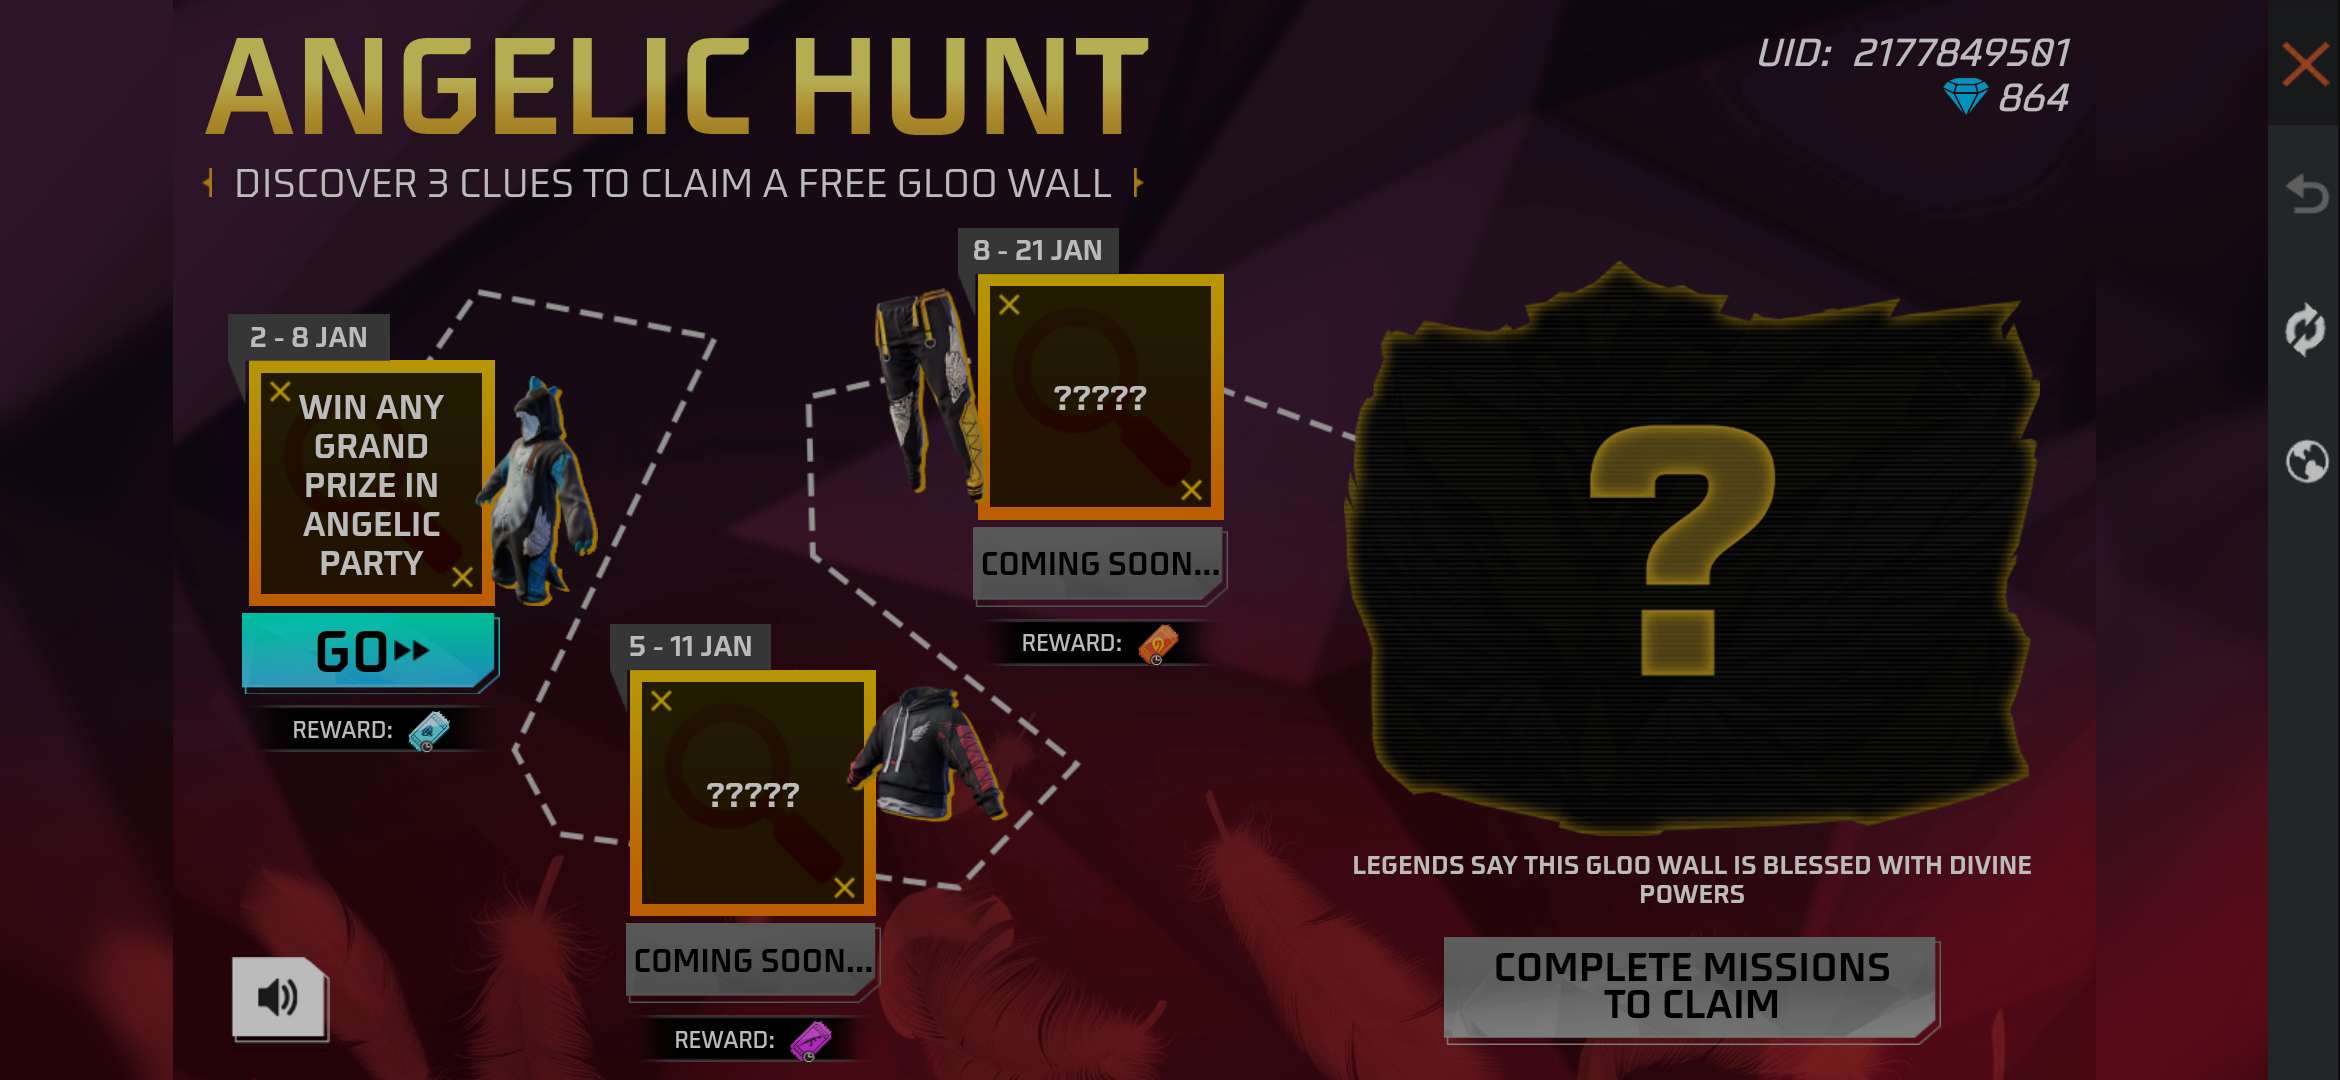 How To Complete Angelic Hunt Mission In Free Fire